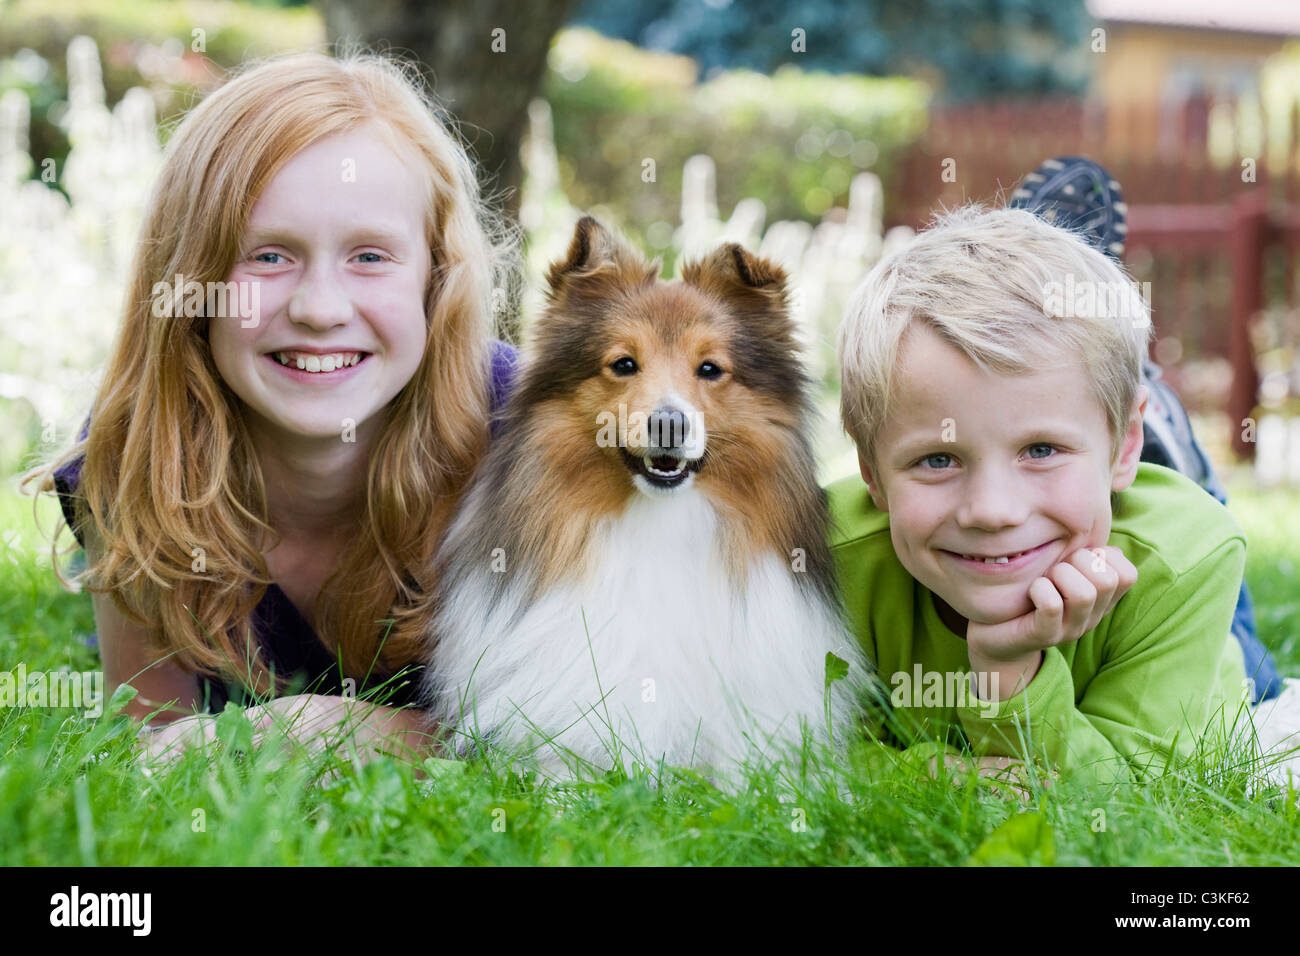 Boy and girl lying on grass with dog Stock Photo